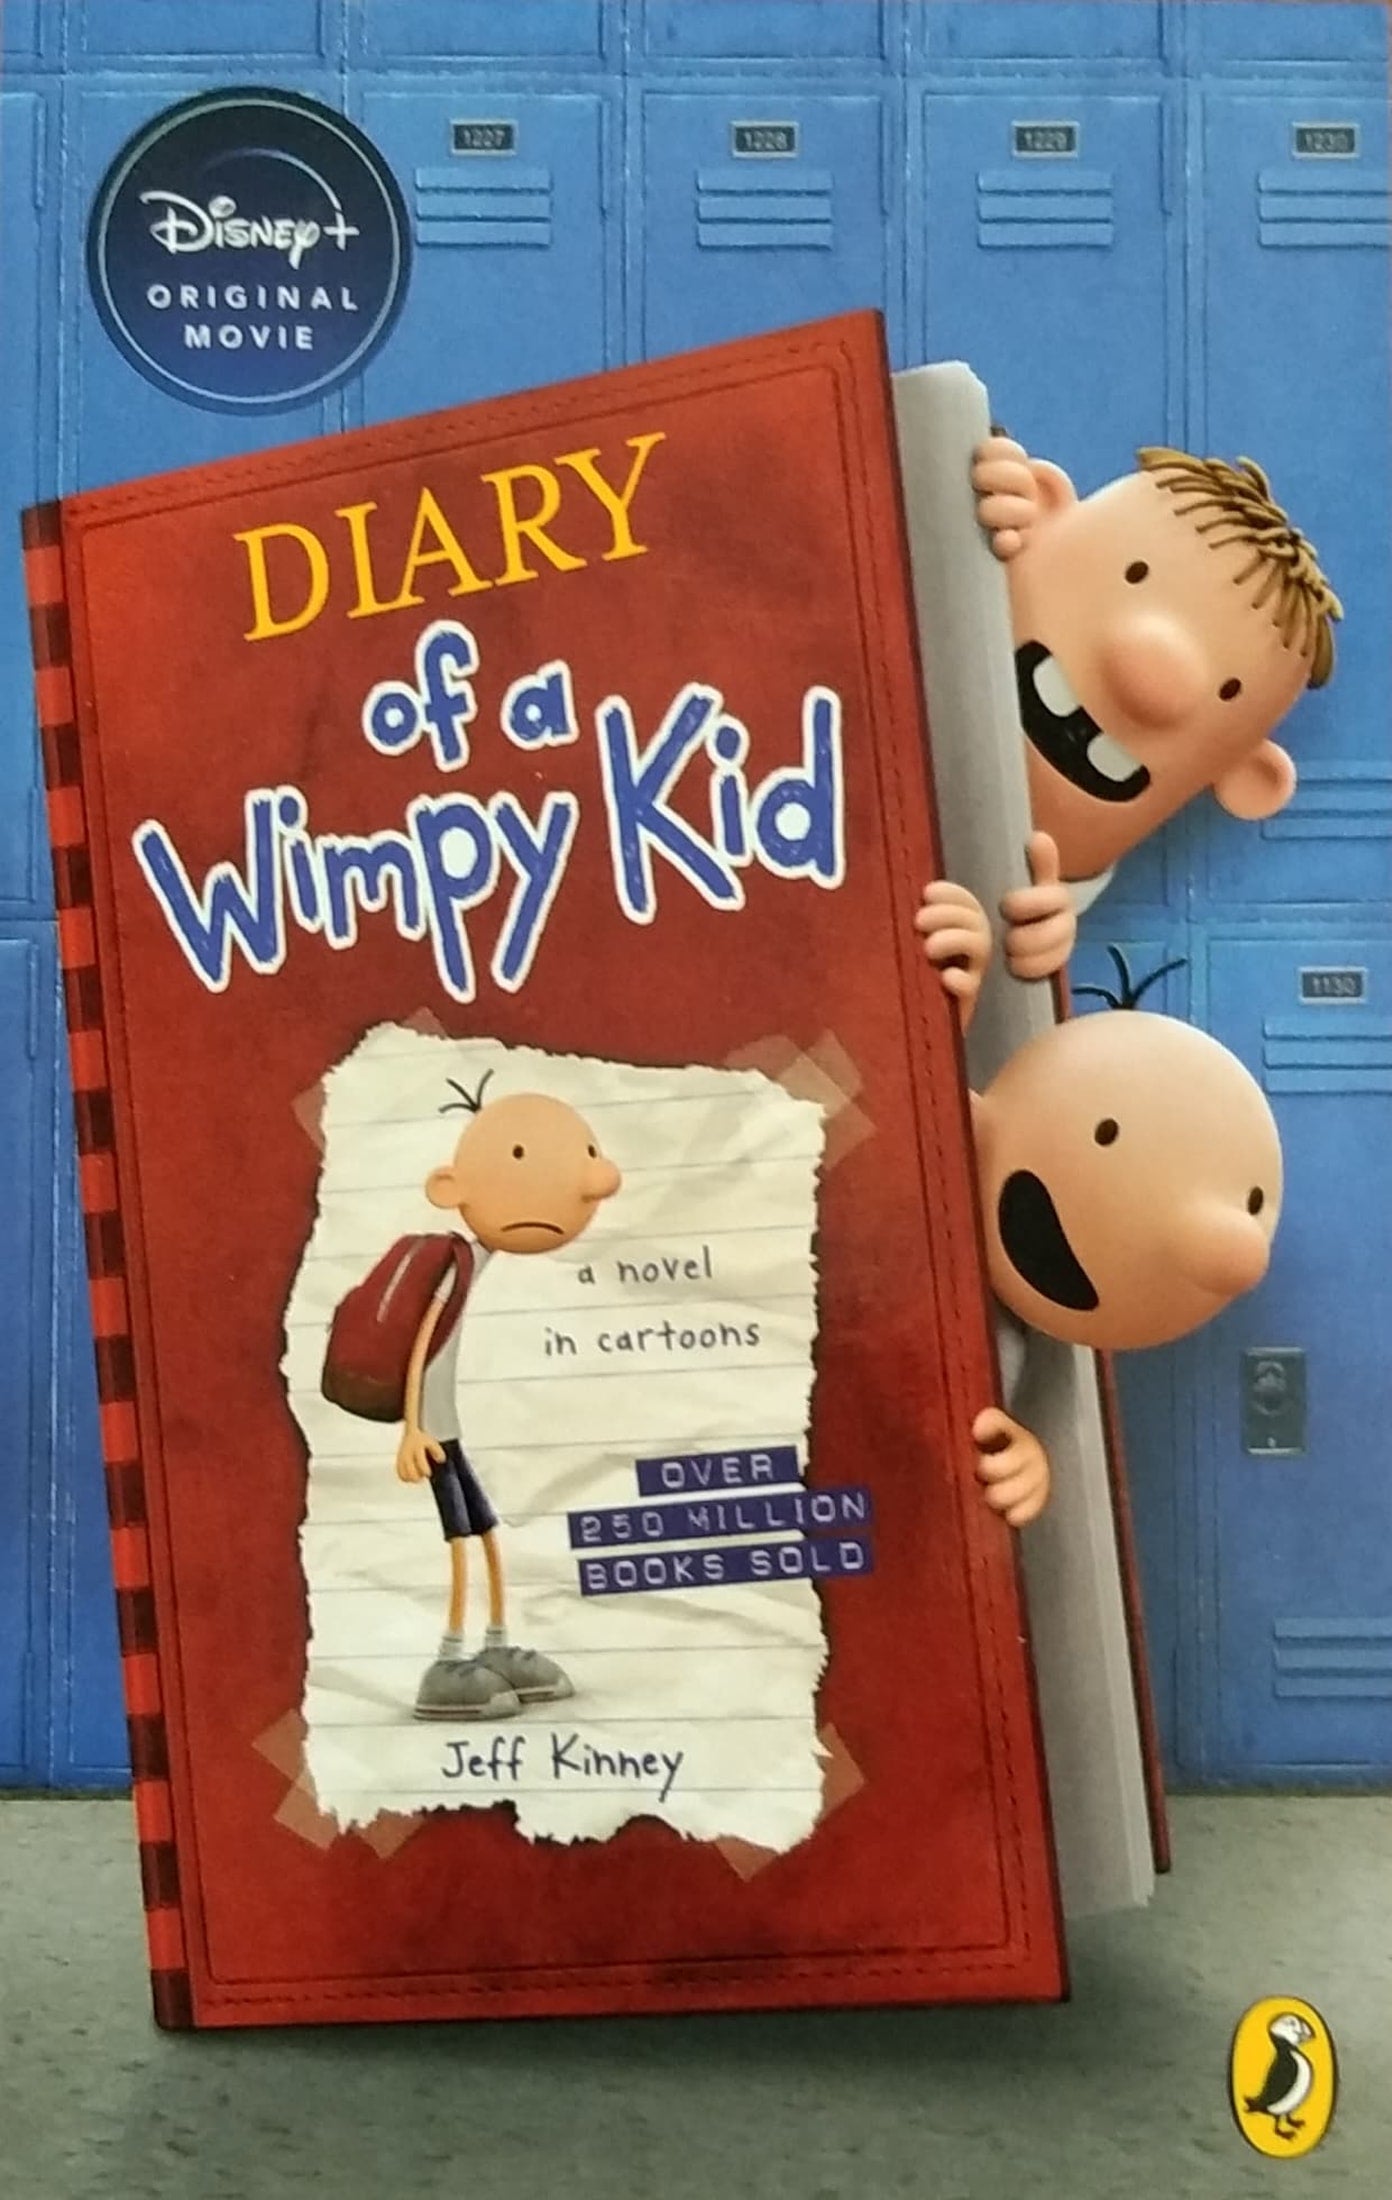 DIARY OF A WIMPY KID - a novel in cartoons